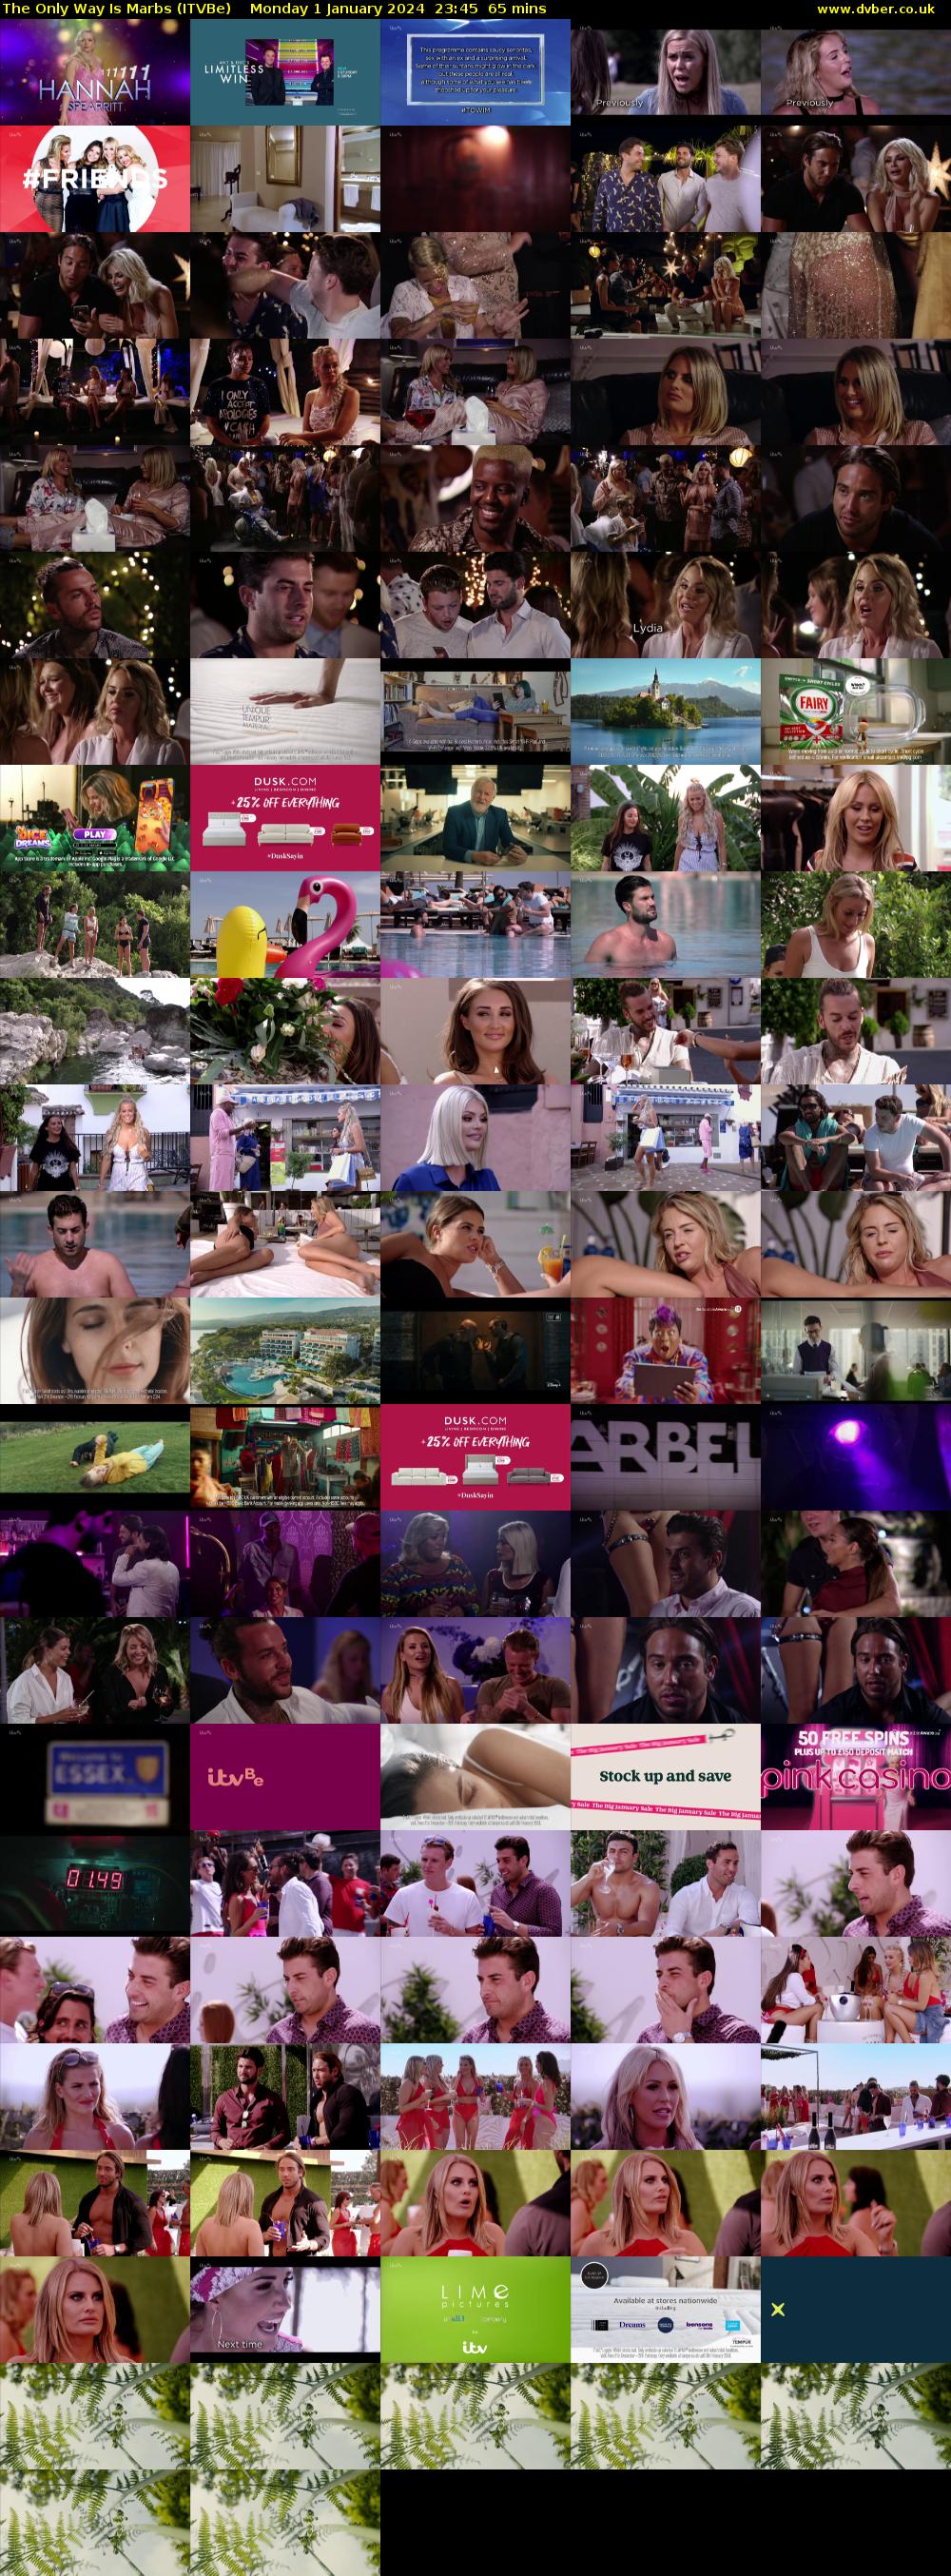 The Only Way is Marbs (ITVBe) Monday 1 January 2024 23:45 - 00:50